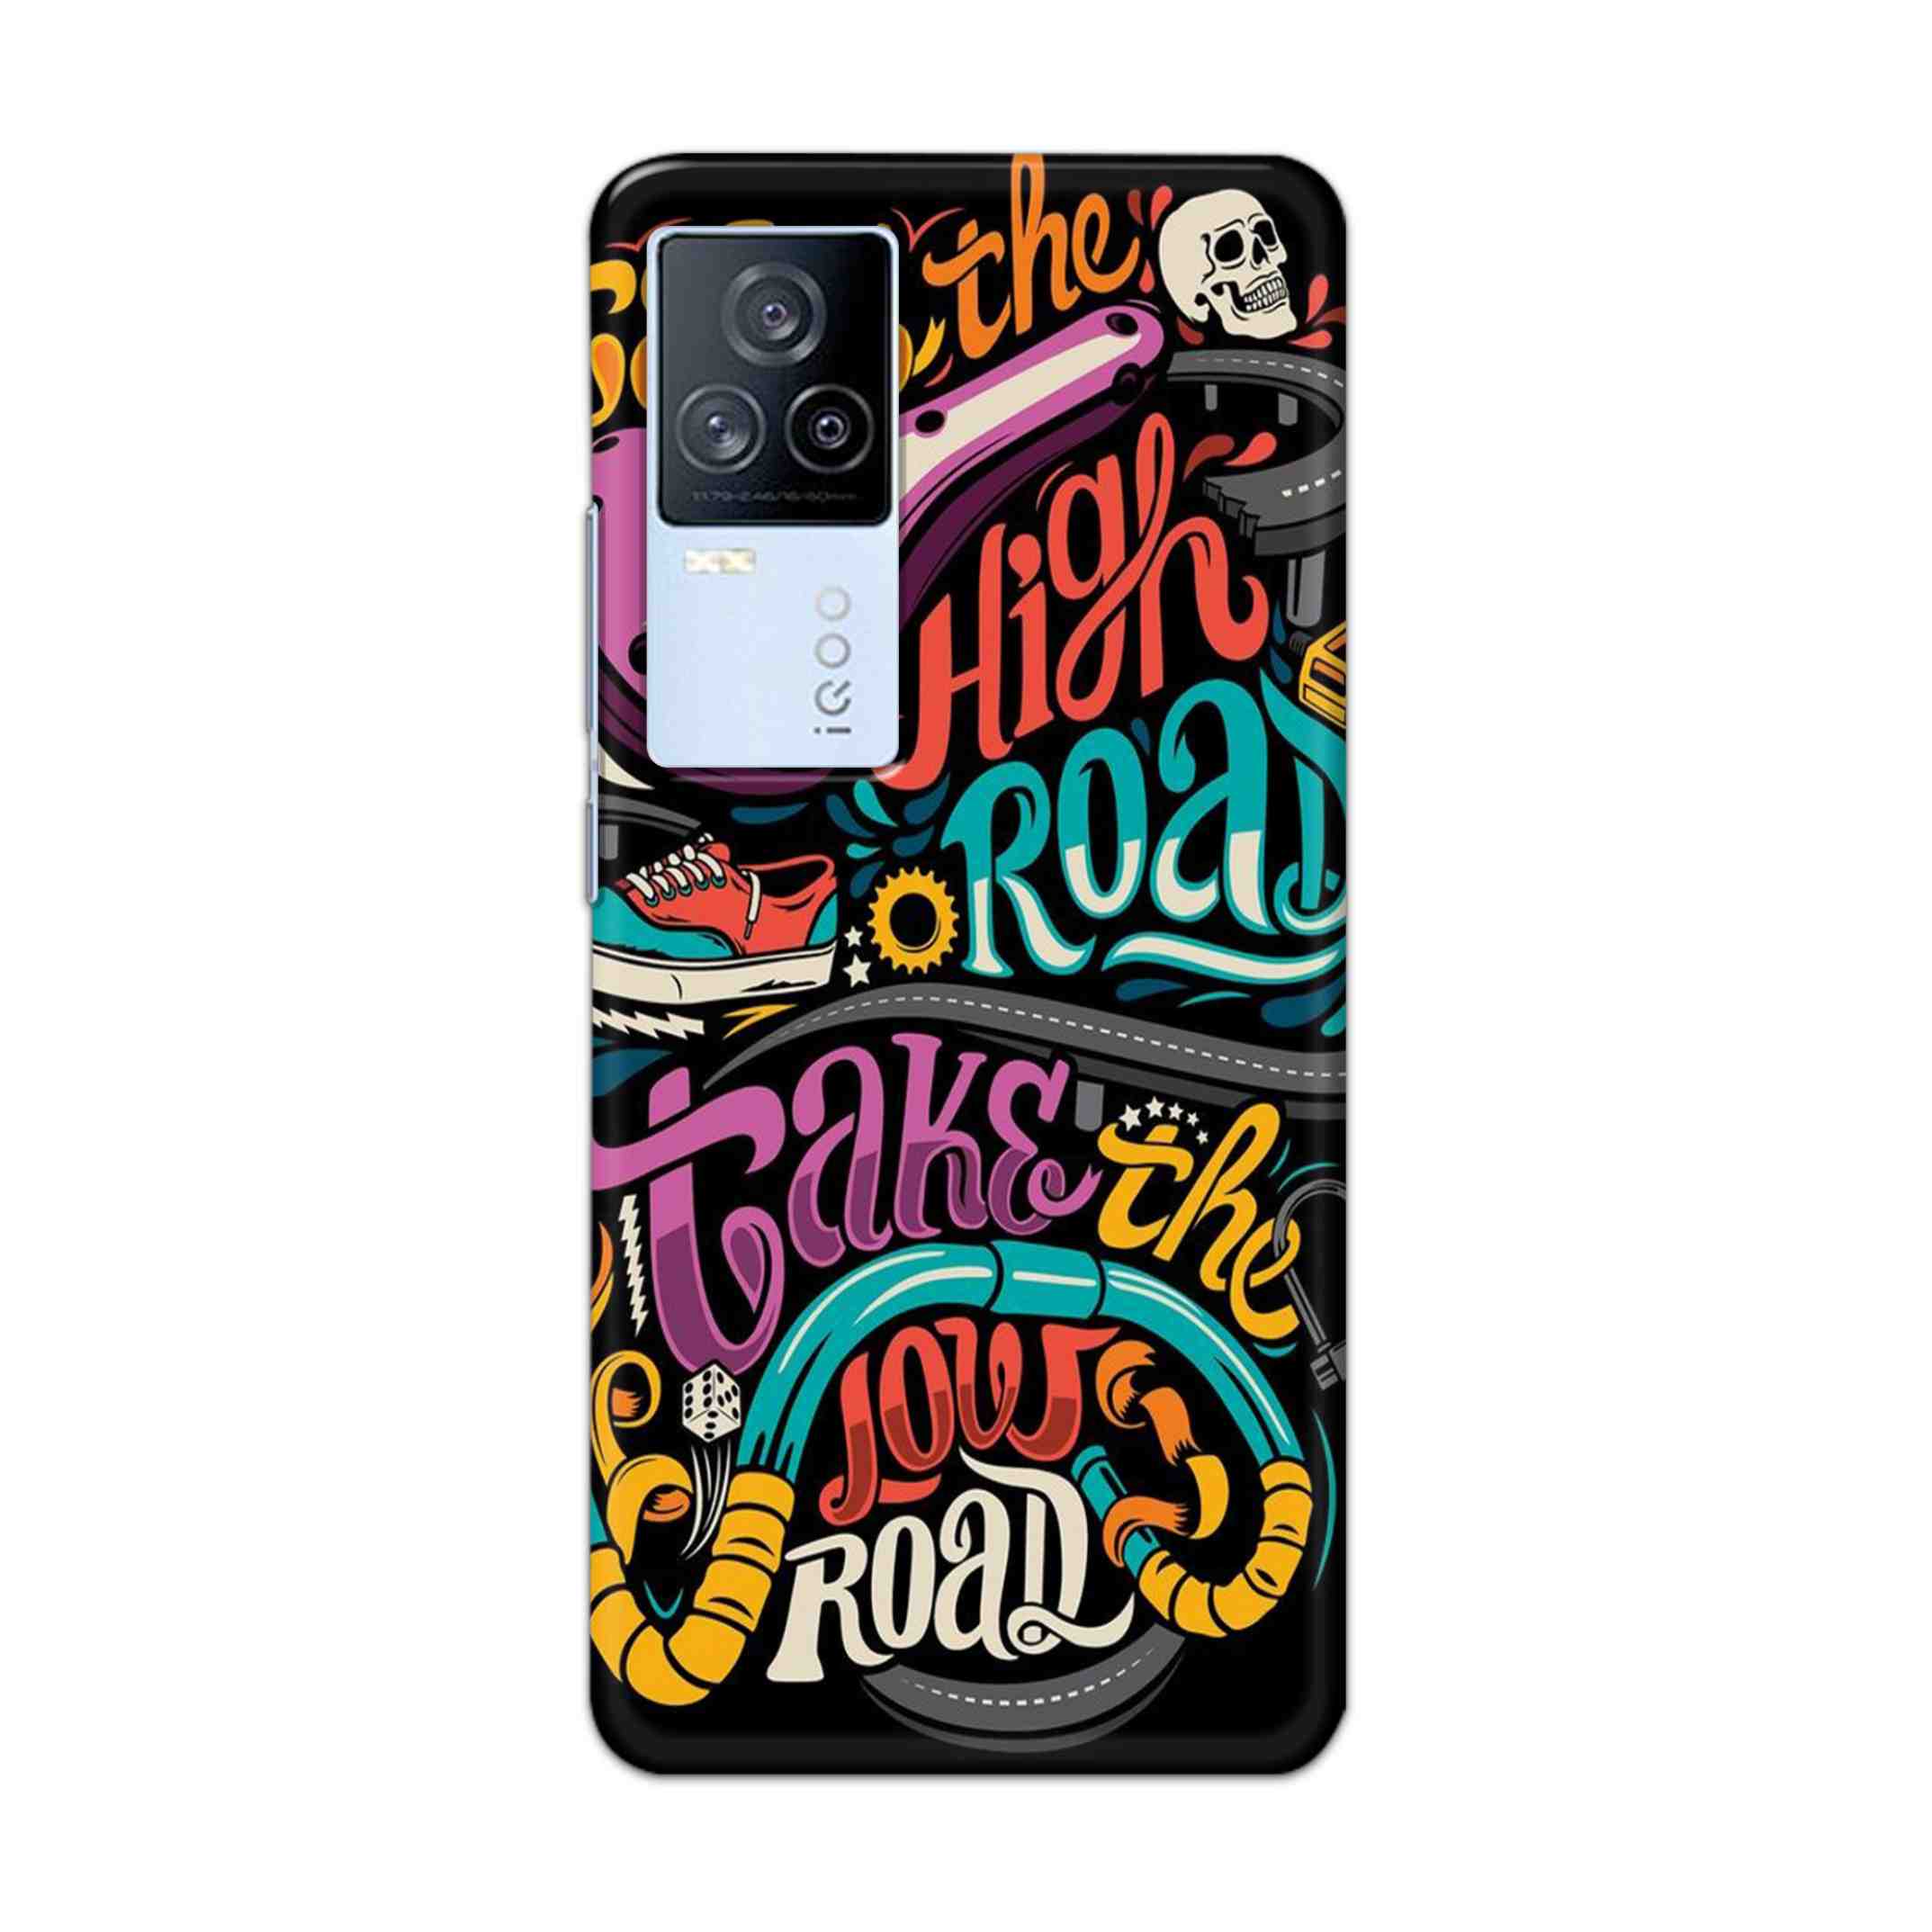 Buy Take The High Road Hard Back Mobile Phone Case/Cover For iQOO7 Online